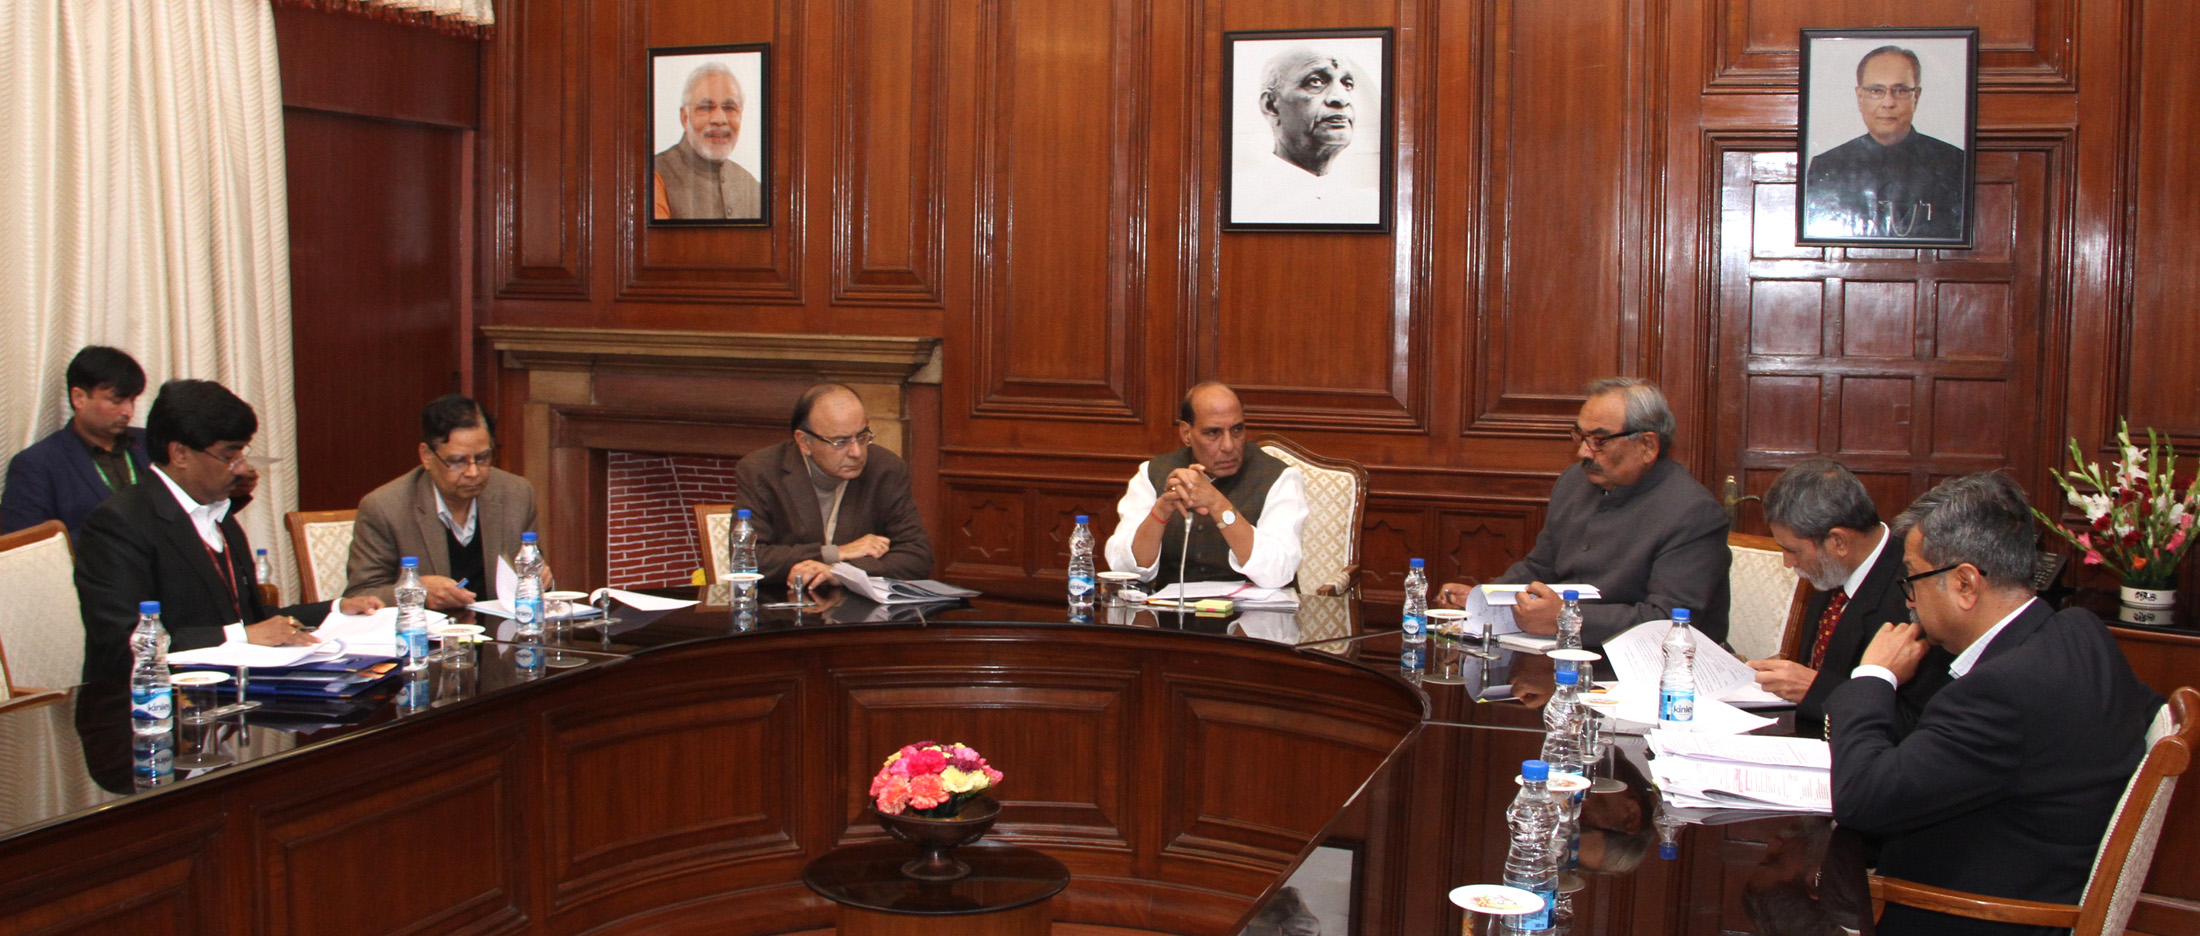 The Union Home Minister, Shri Rajnath Singh chairing a meeting of the High Level Committee for Central Assistance to States affected by natural disasters, in New Delhi on December 21, 2015.  The Union Minister for Finance, Corporate Affairs and Information & Broadcasting, Shri Arun Jaitley, the Vice-Chairman, NITI Aayog, Shri Arvind Panagariya, the Union Home Secretary, Shri Rajiv Mehrishi, the Union Agriculture Secretary, Shri Siraj Hussain and the senior officers of the Ministries of Home, Finance and Agriculture are also seen.